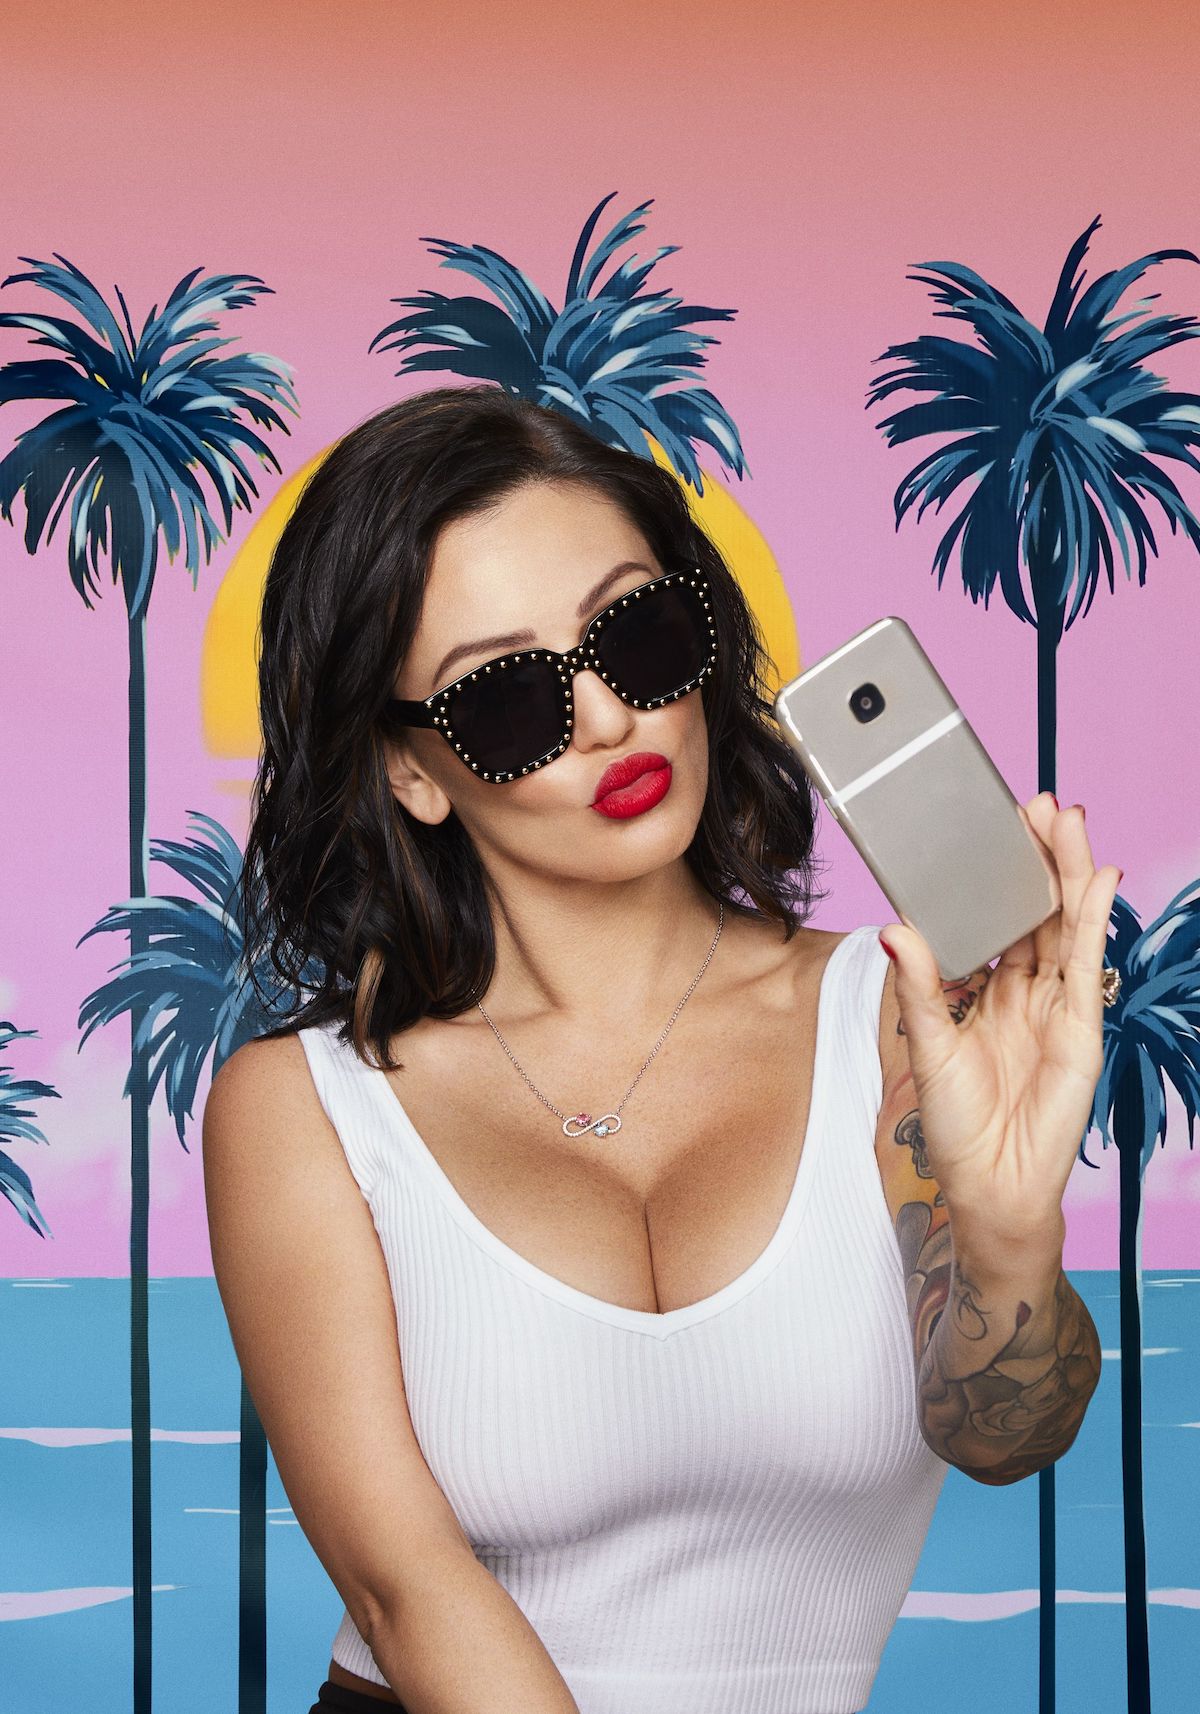 Jenni 'JWoww' Farley using a cell phone on 'Jersey Shore: Family Vacation'